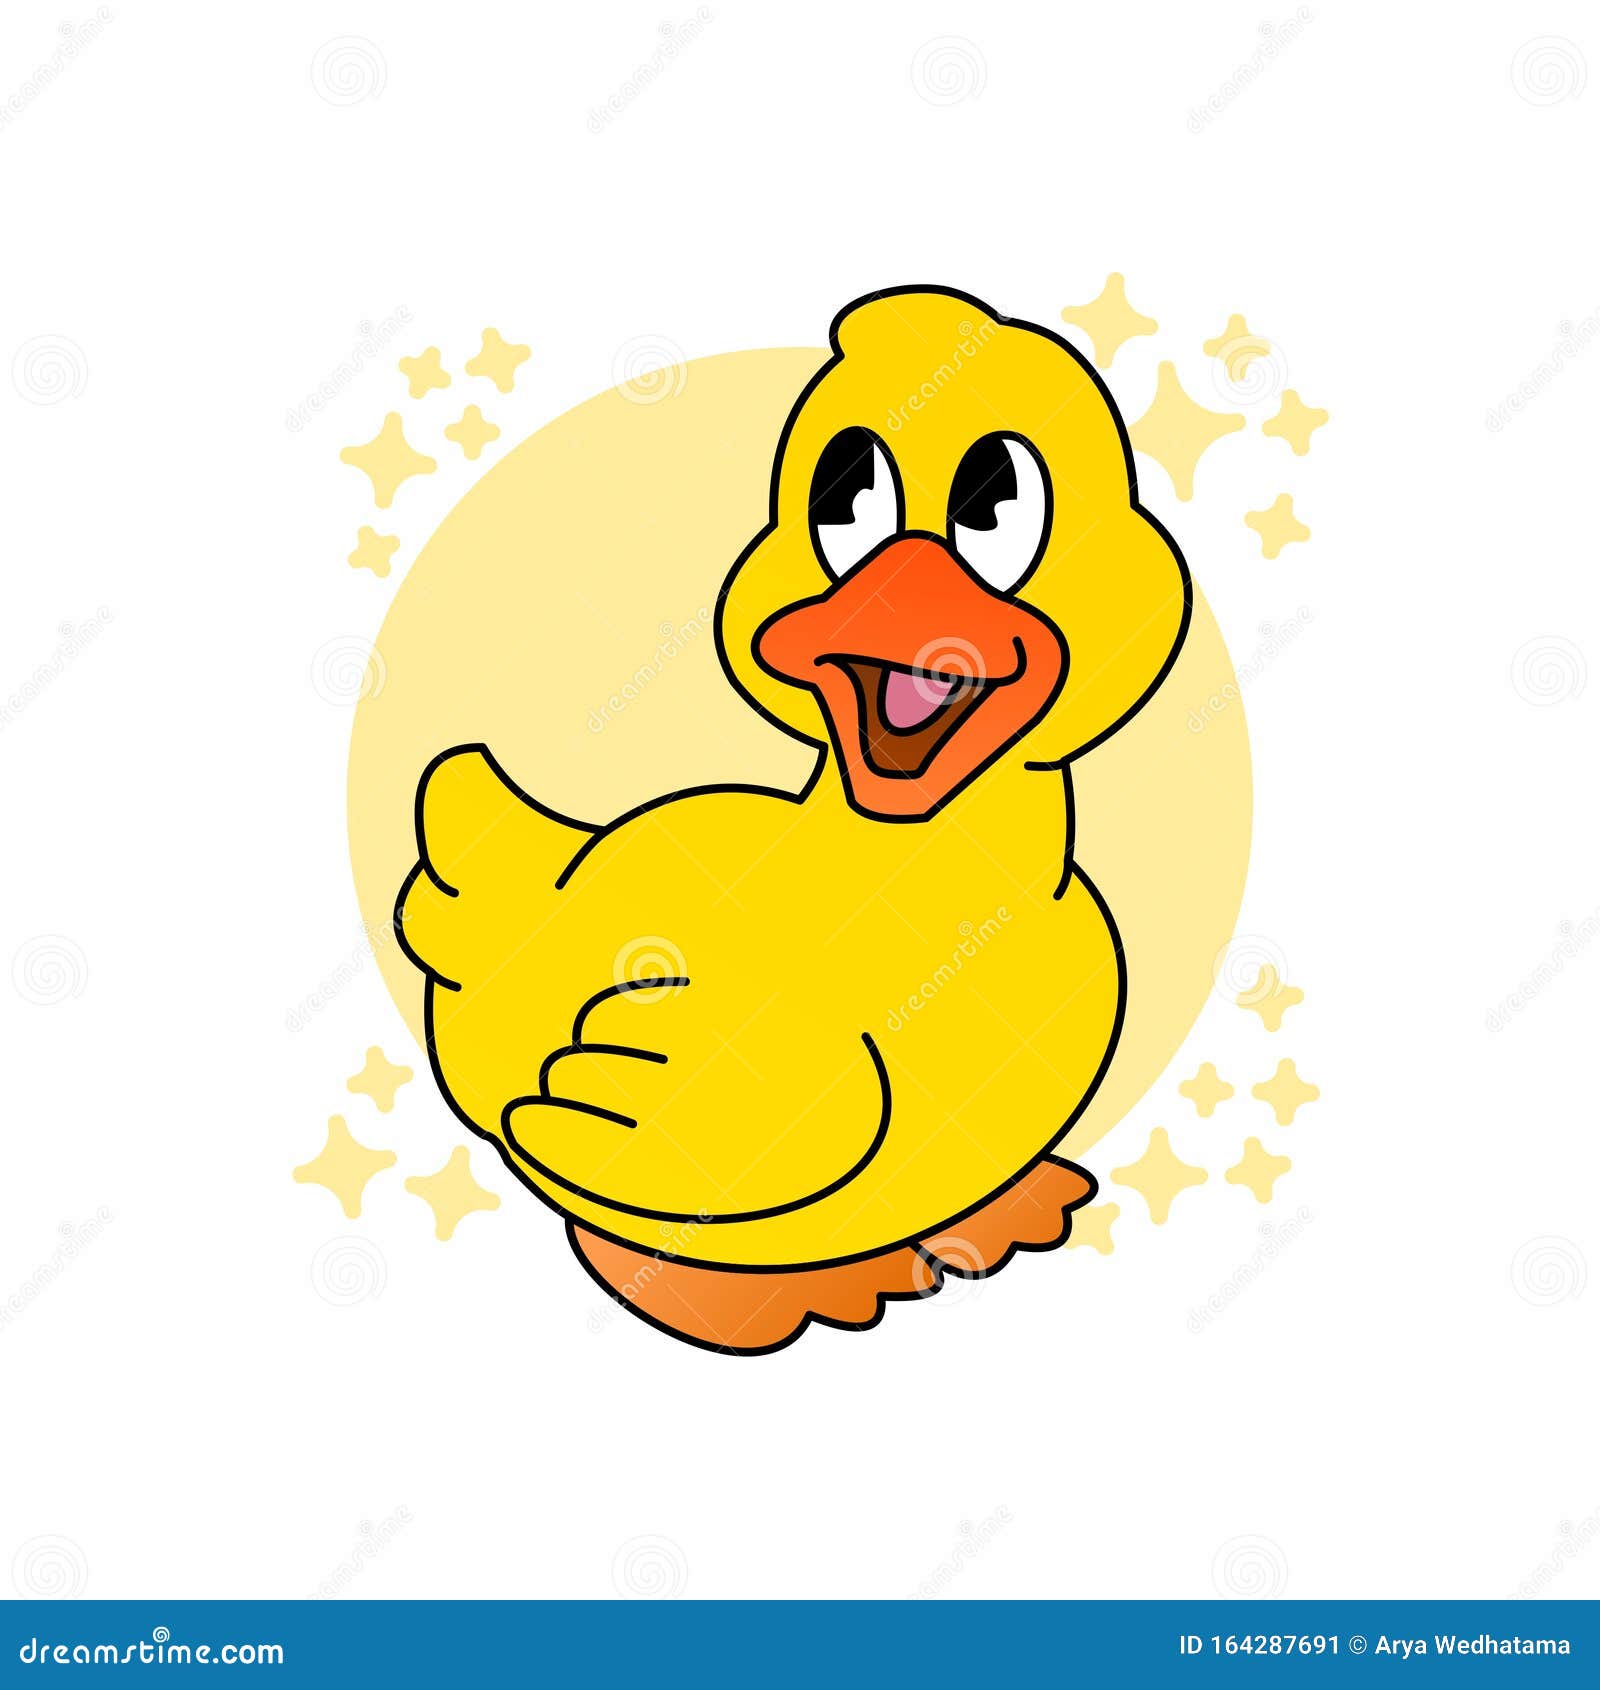 Illustration of Duck Cartoon, Cute Funny Character with Yellow Color, Flat  Design Stock Illustration - Illustration of design, animals: 164287691